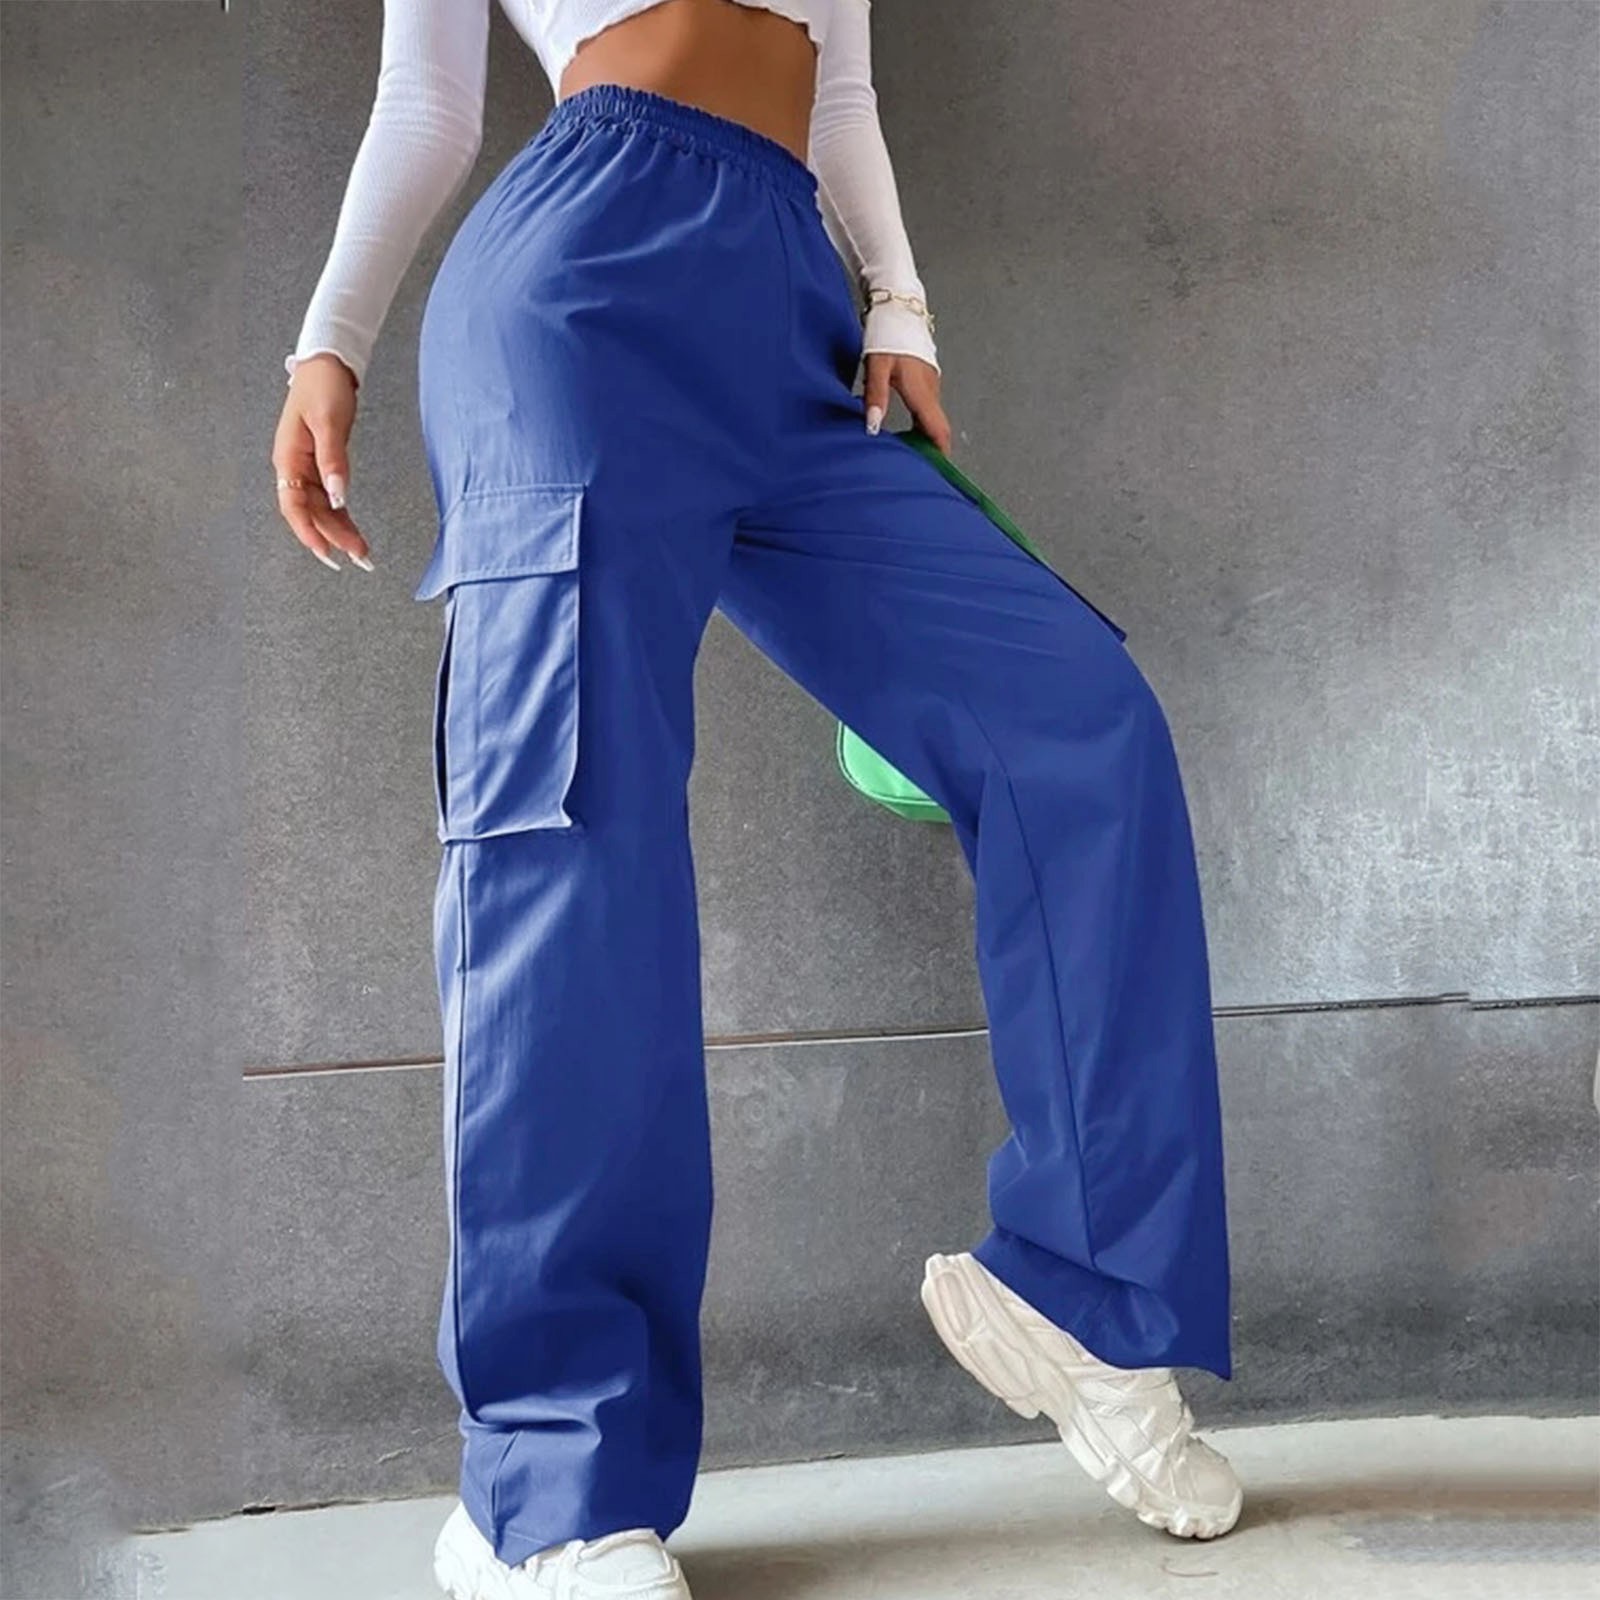 Women Pockets Casual Pants Solid Overalls Mid Waist Elastic Waist Loose Cargo Pants Trousers